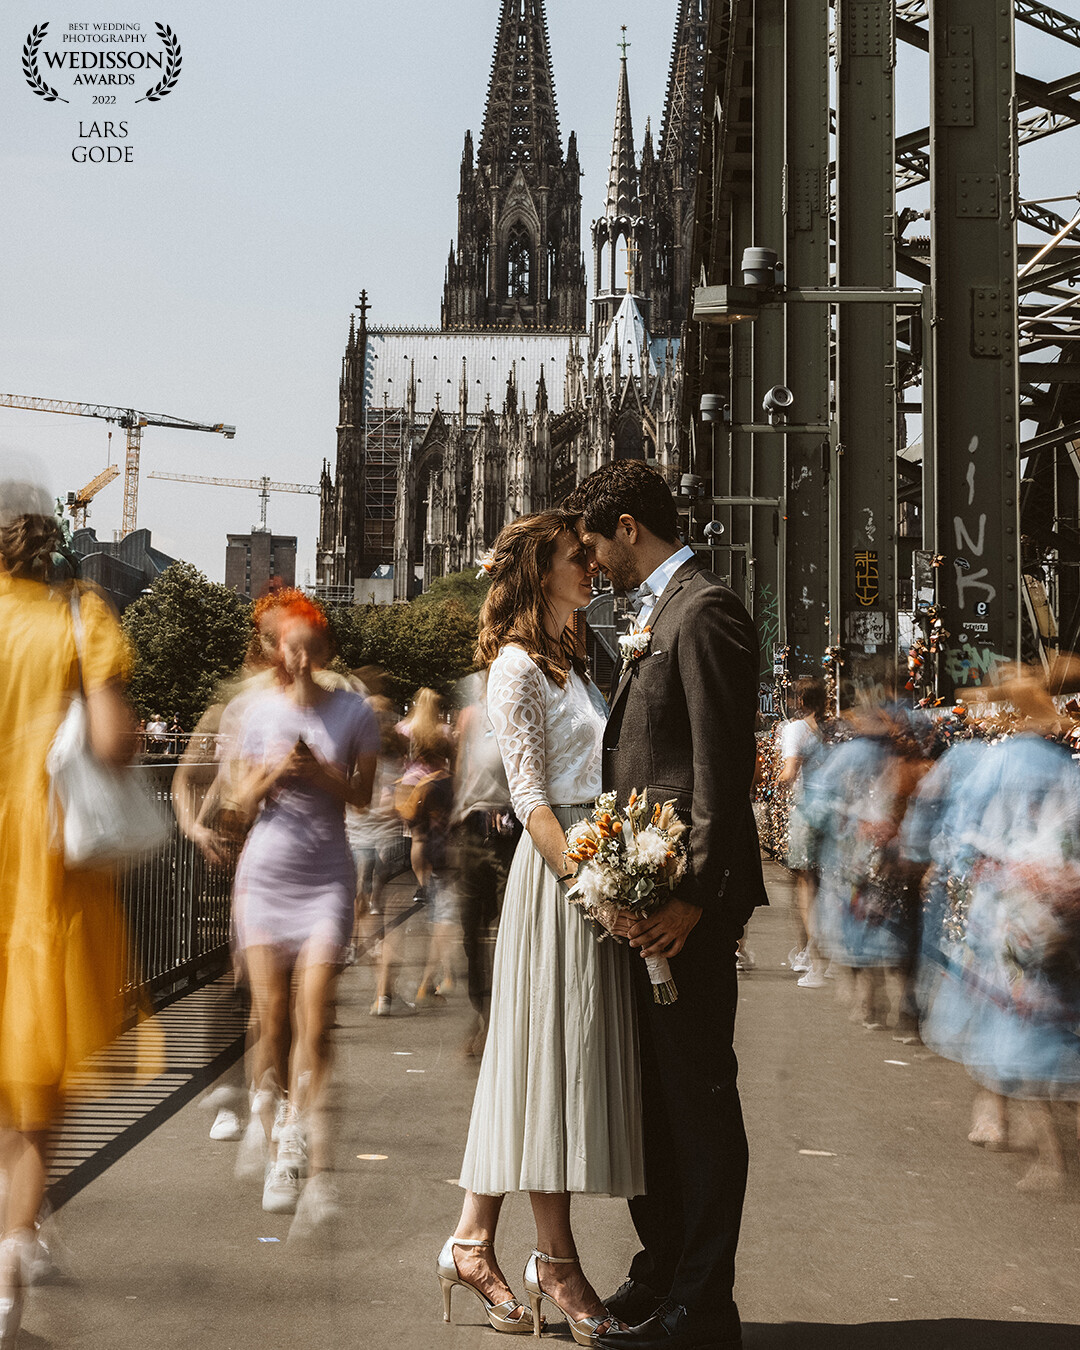 In Cologne, Germany, the Hohenzollern Bridge crosses the Rhine. Thousands of love locks hang from the railing. This bridal couple has also immortalized themselves there with a castle. I was able to capture the quiet moment afterwards.